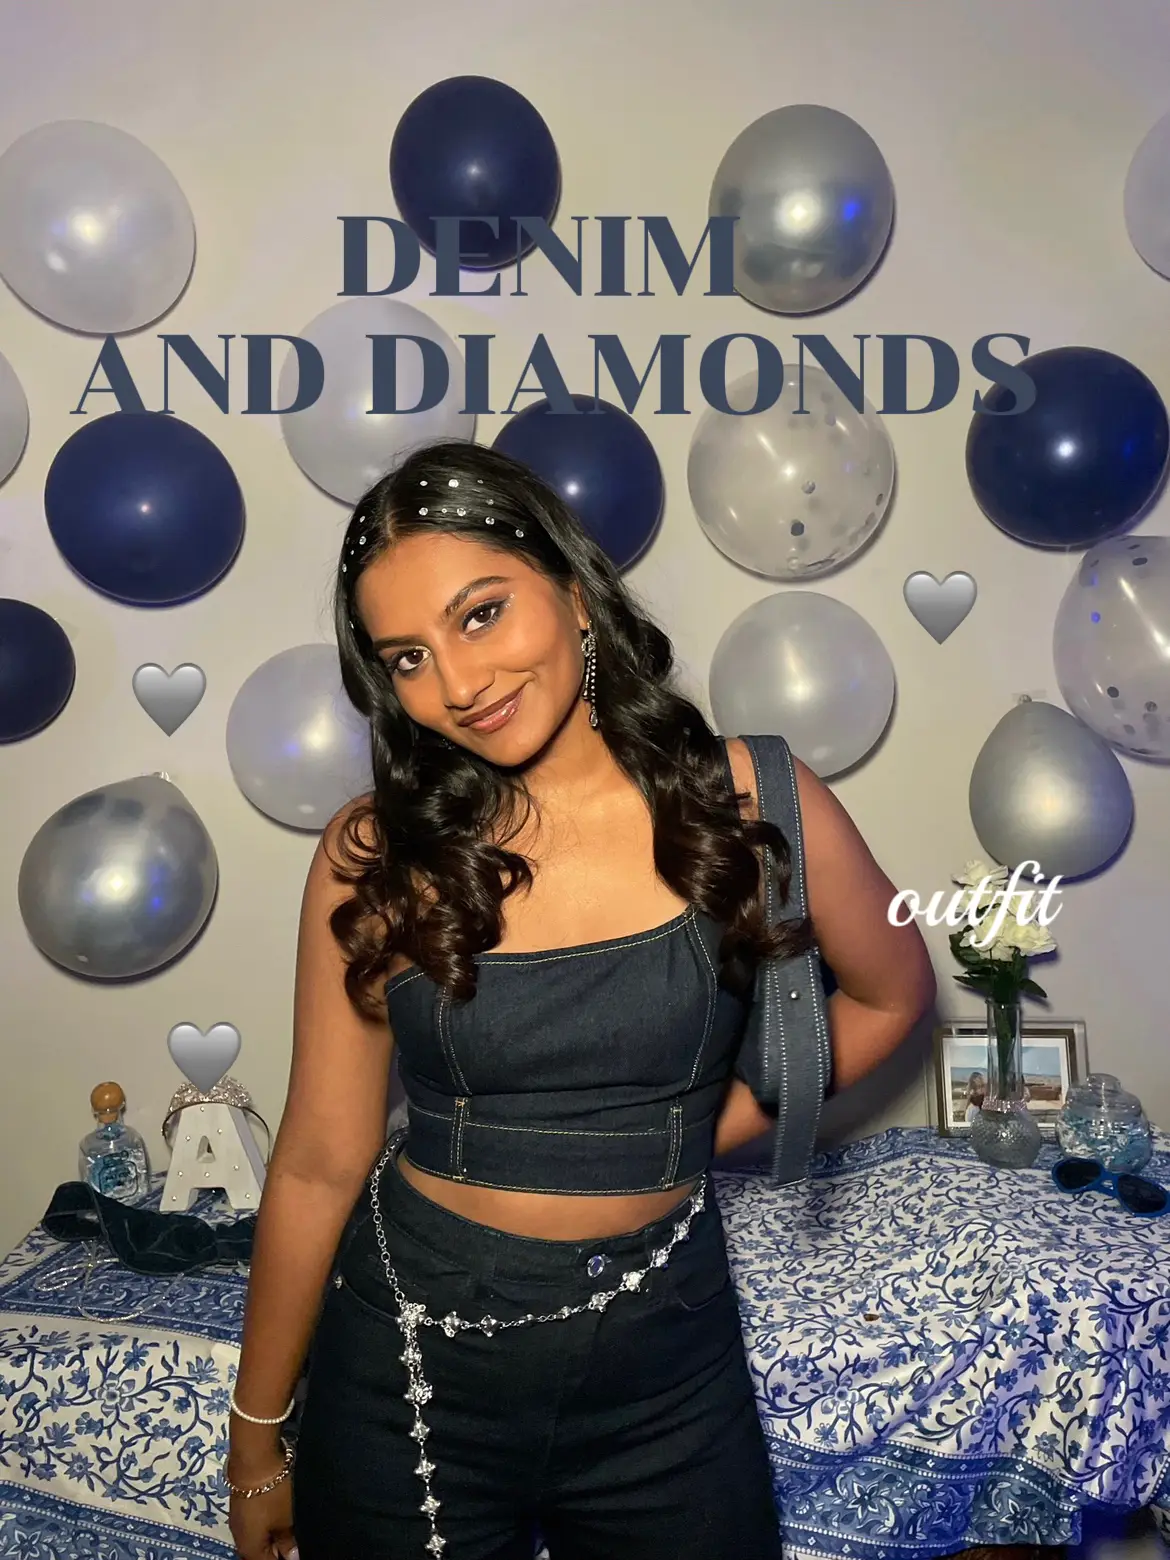 denim and diamonds outfit idea 💎🤍🩶🦋, Gallery posted by Anuja Bagri